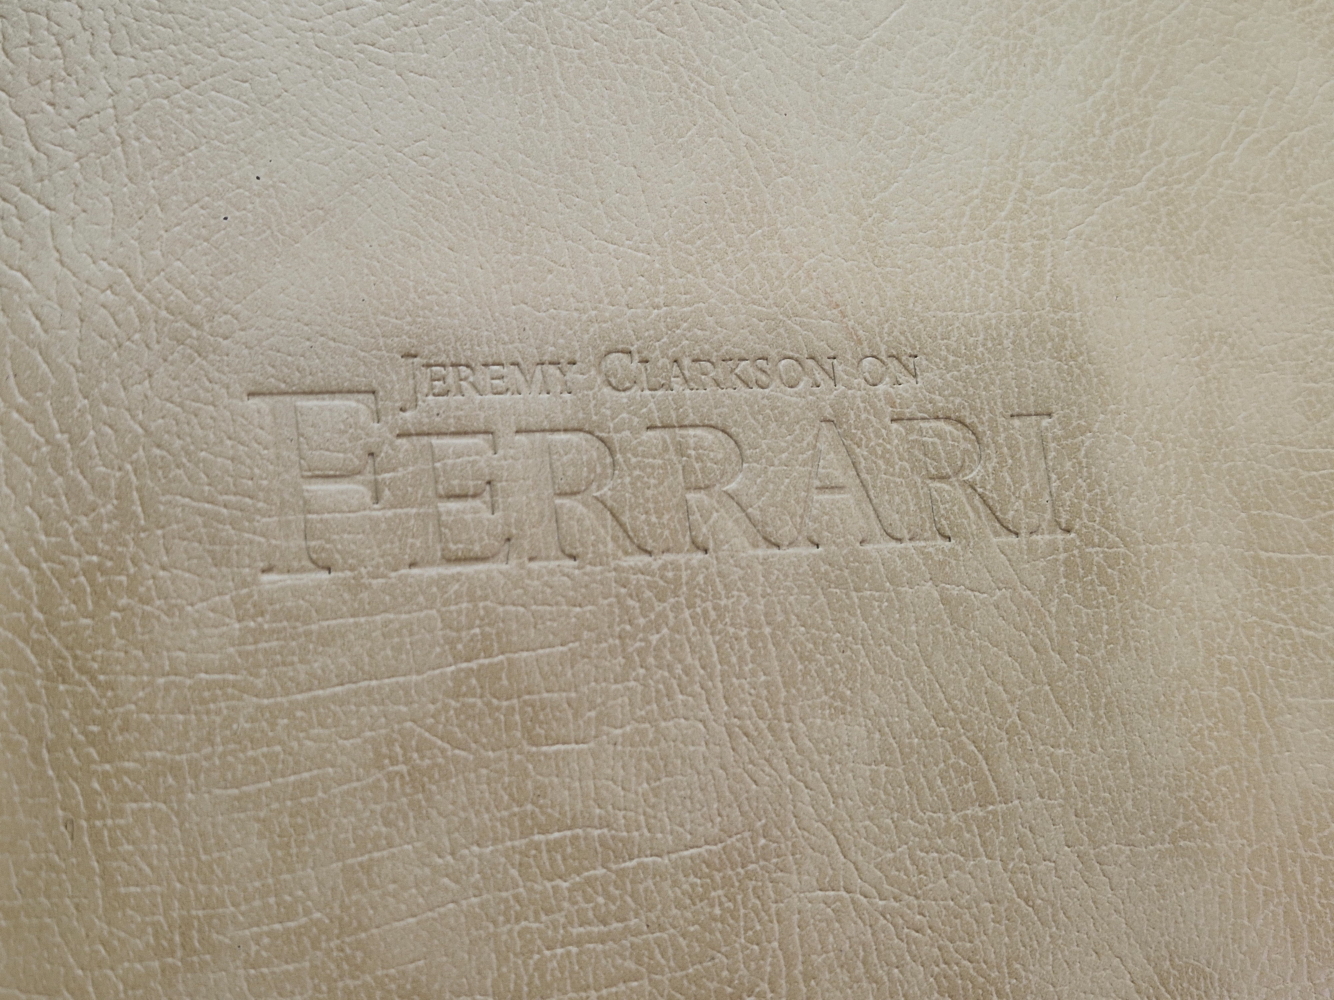 JEREMY CLARKSON ON FERRARI. LIMITED EDITION. IN UNUSUAL COPY OF THIS RARE BOOK WITH LEATHER - Image 2 of 2